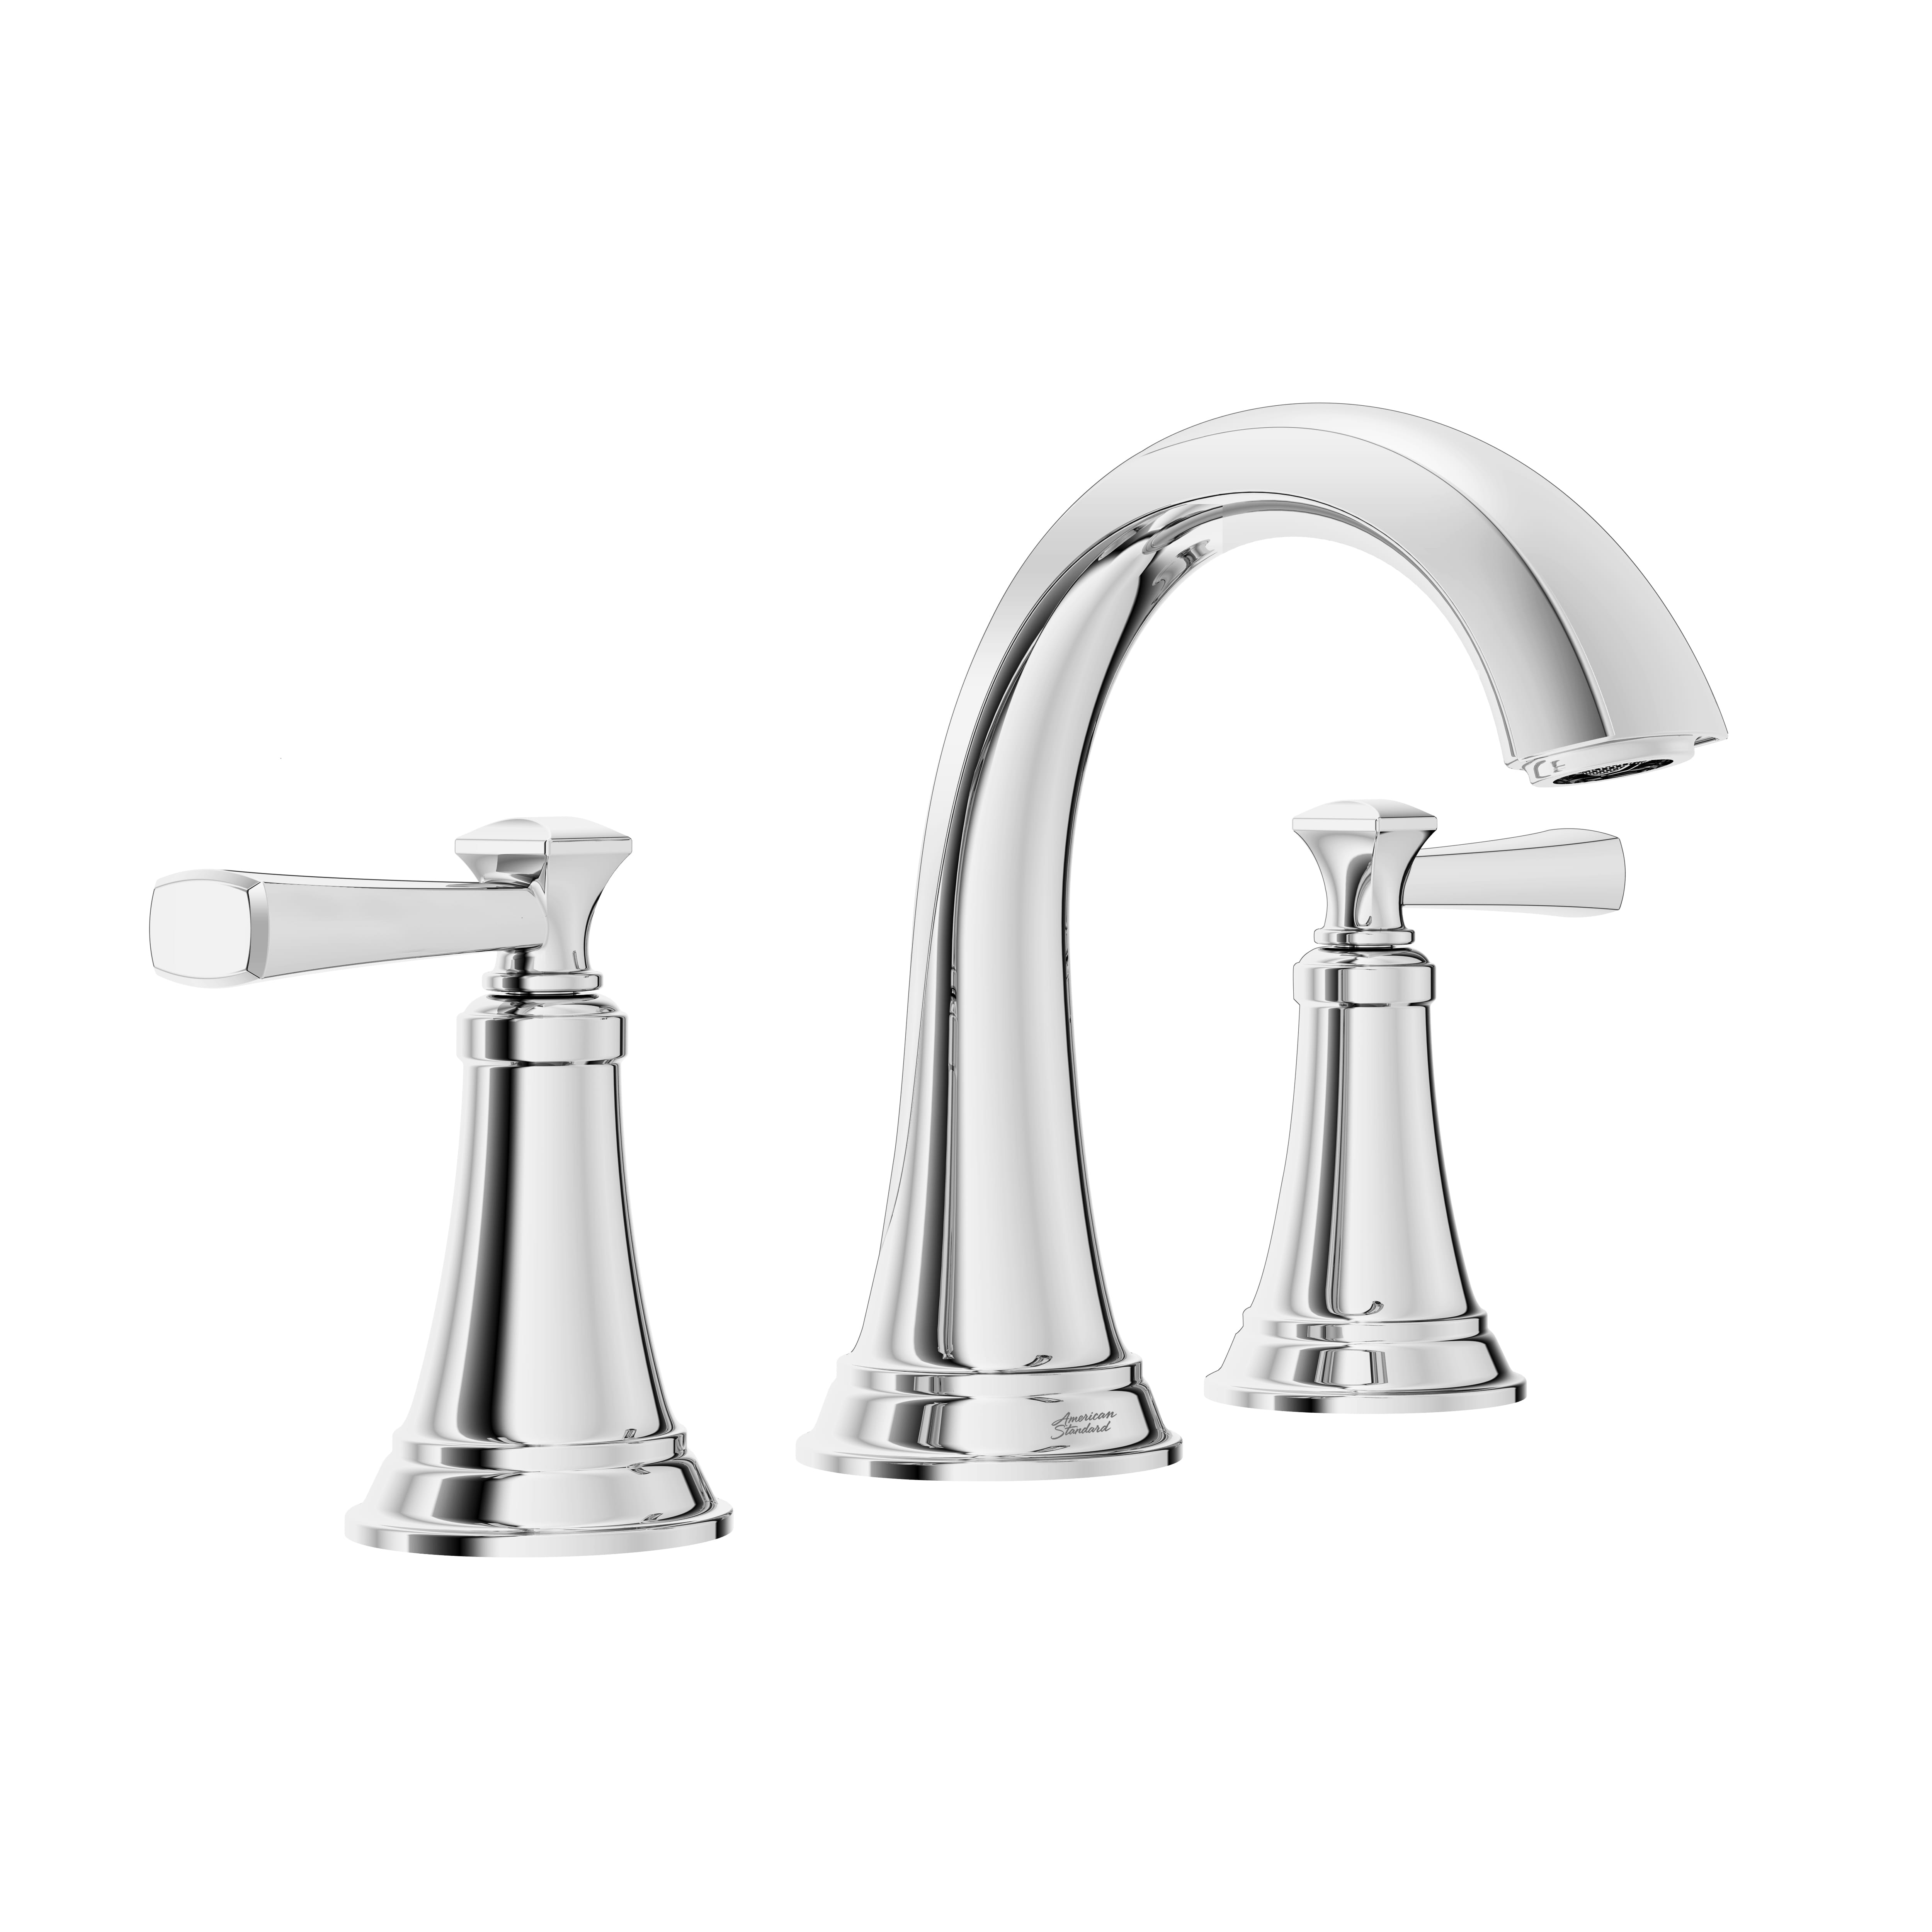 Glenmere 8 Inch Widespread 2 Handle Bathroom Faucet with Metal Drain POLISHED CHROME